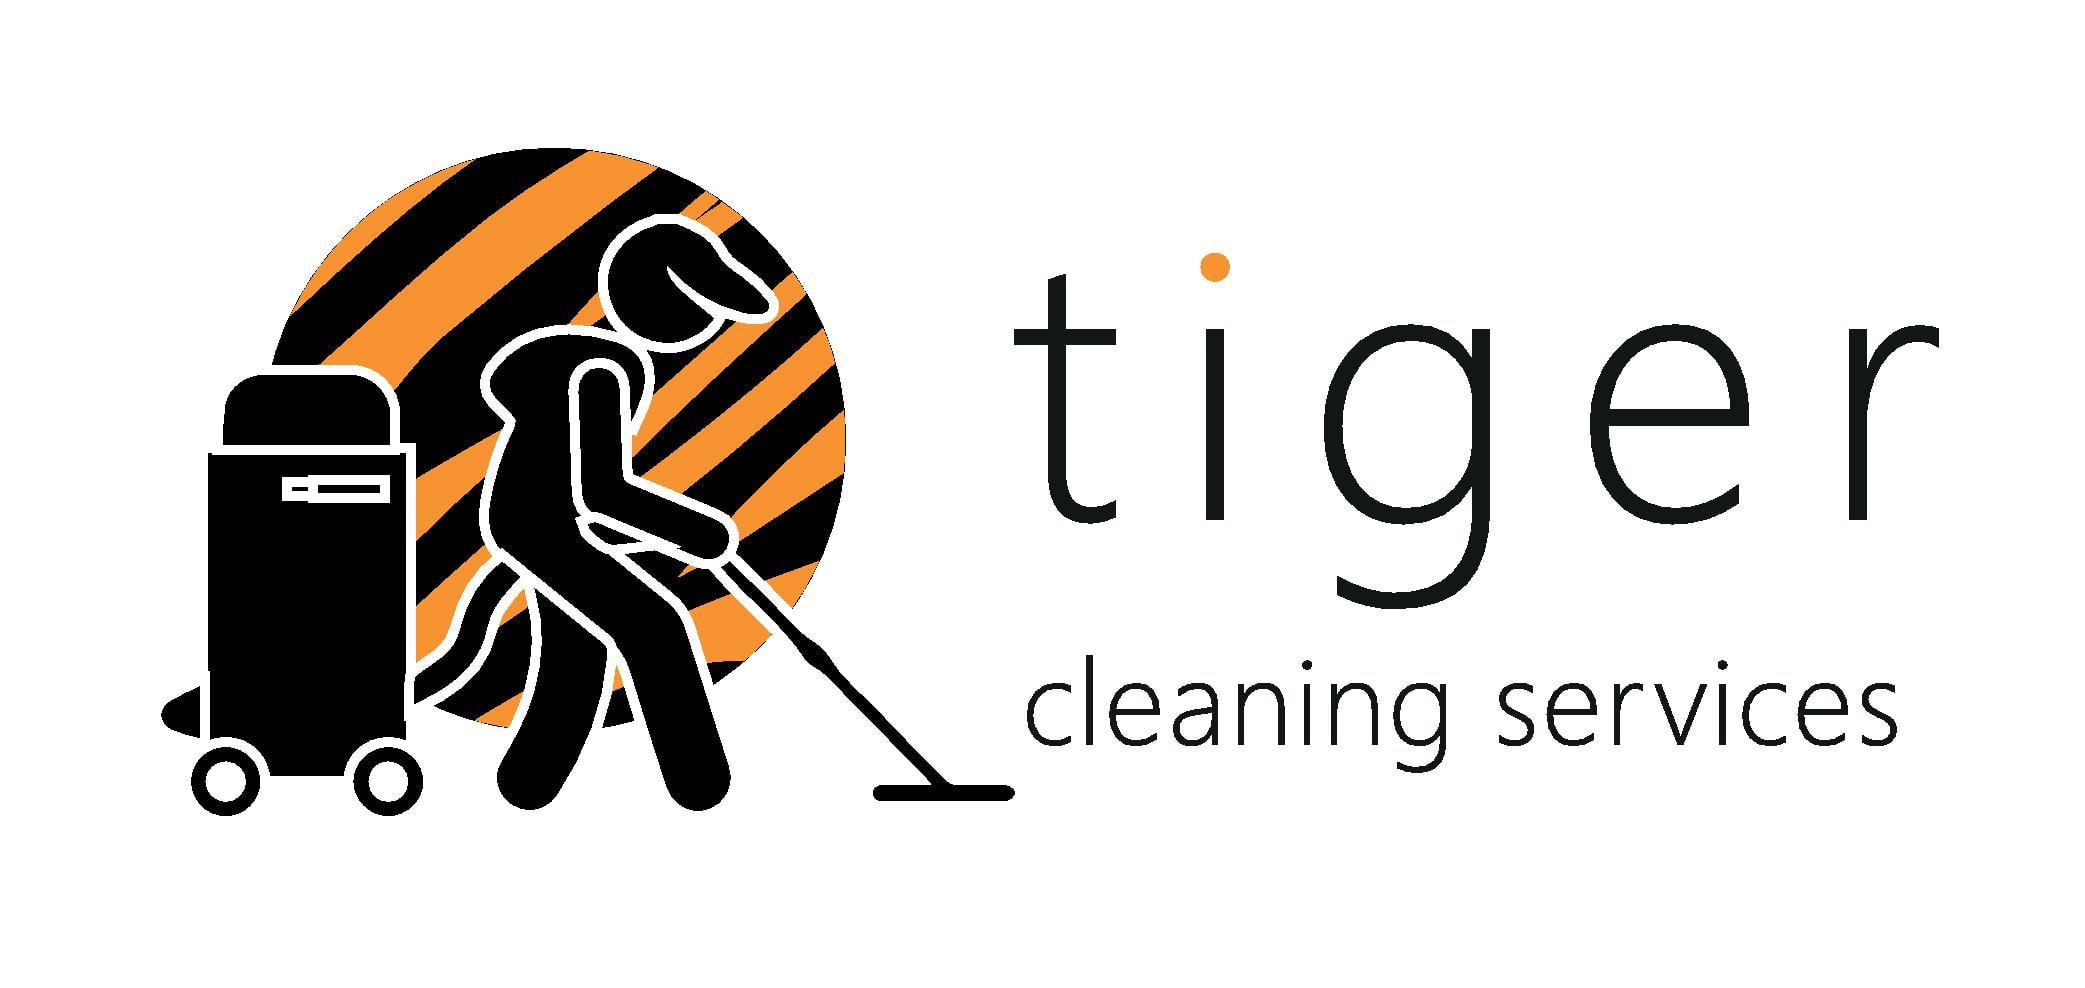 Tiger - Cleaning Services